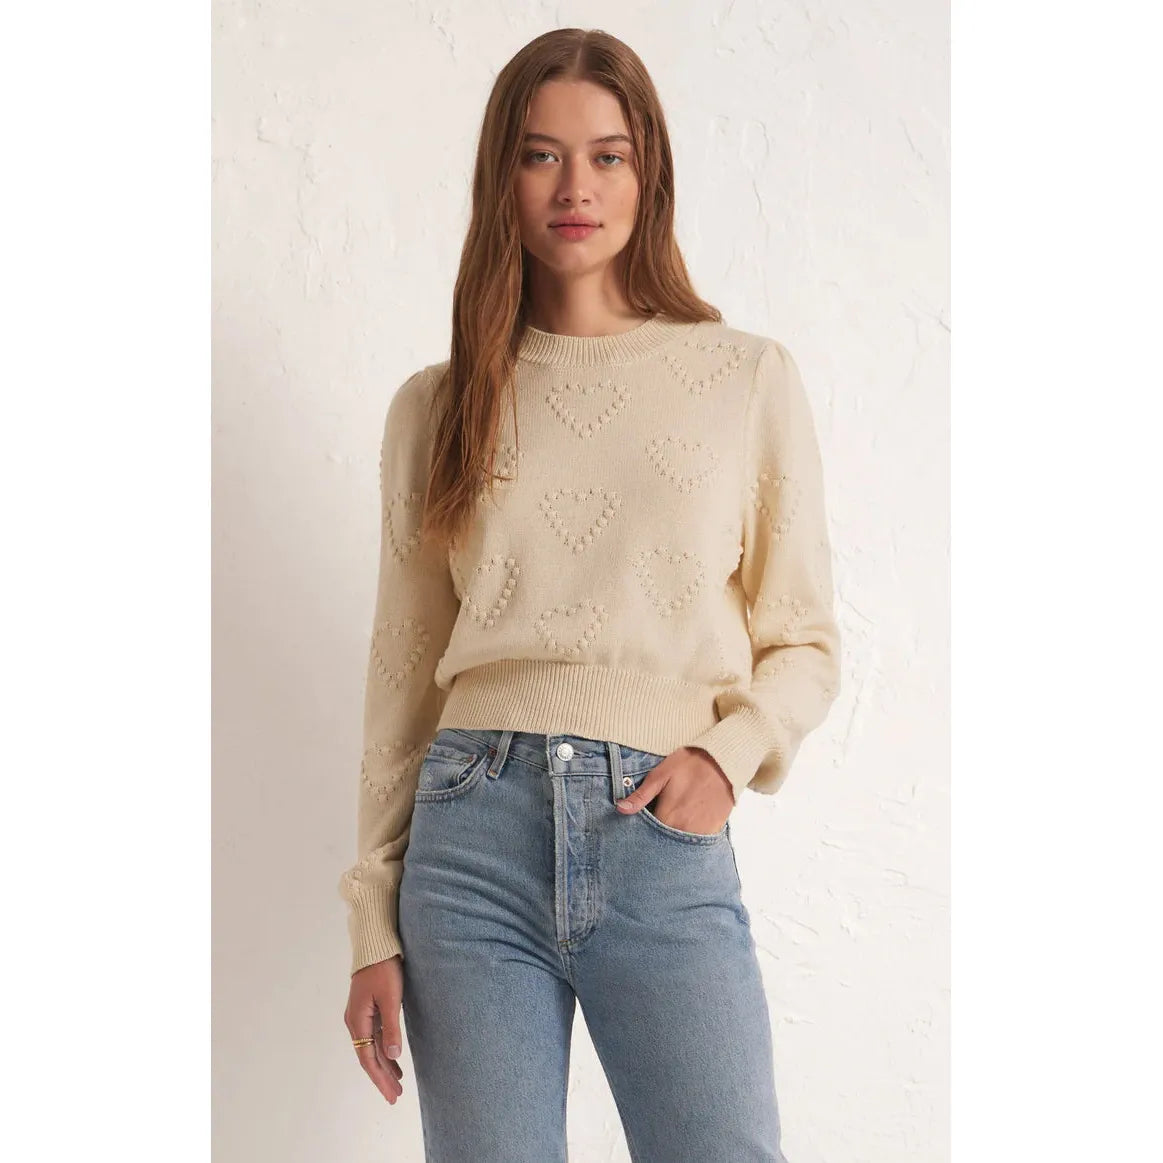 Z Supply - All We Need Is Love Sweater in Sandstone